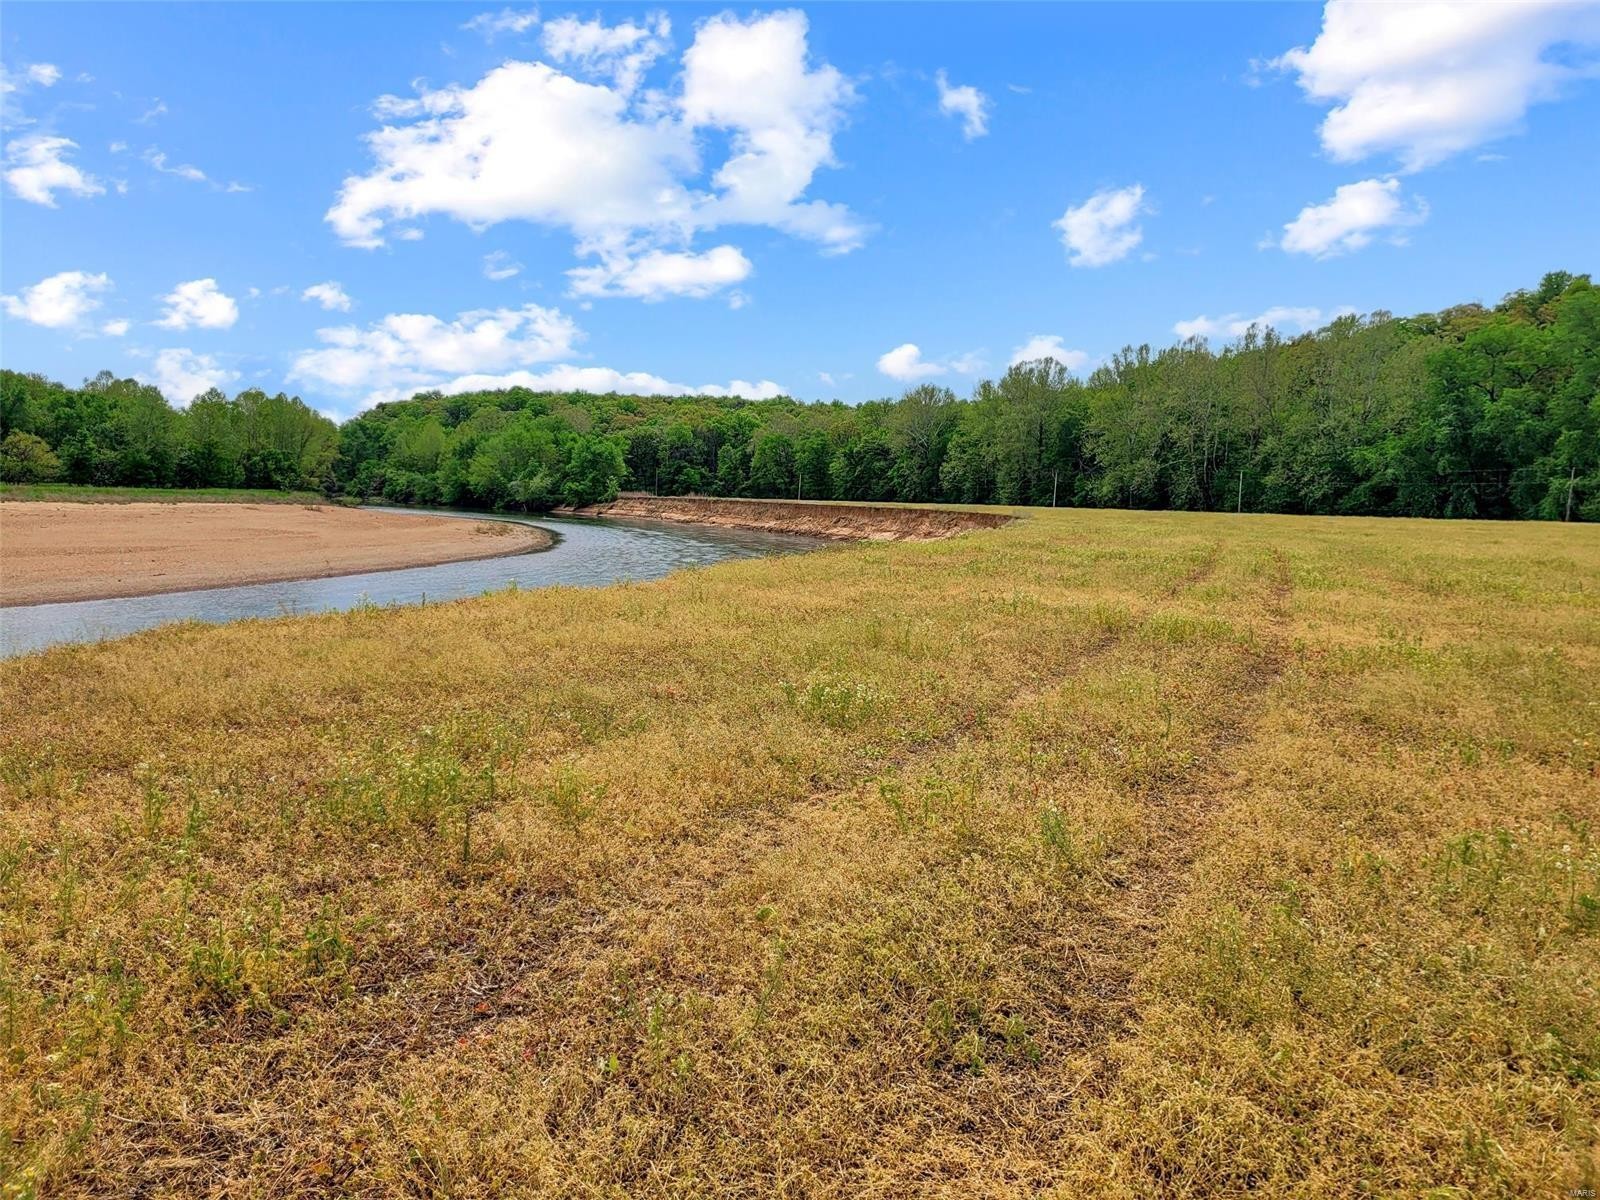 1. 0 Old Cove Rd. (117.6+/- Acres)